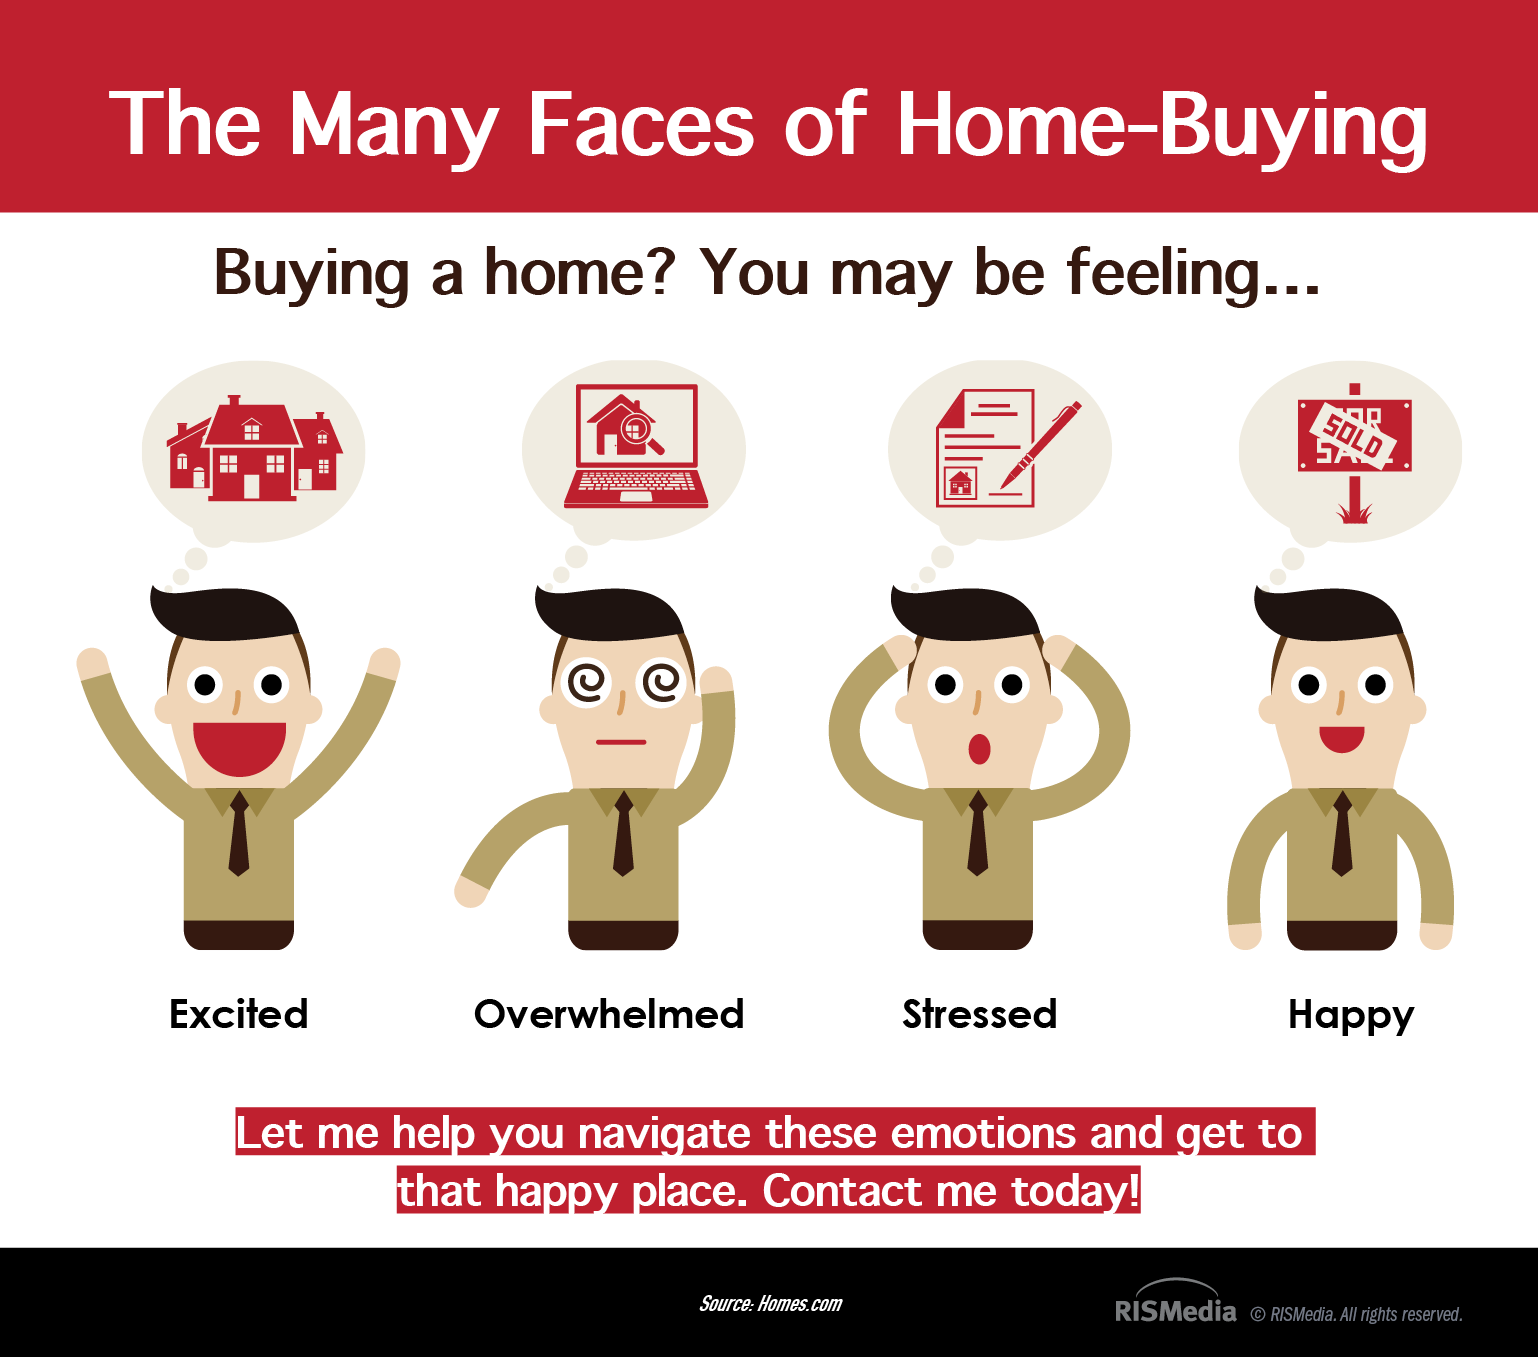 The Many Faces of Home-Buying